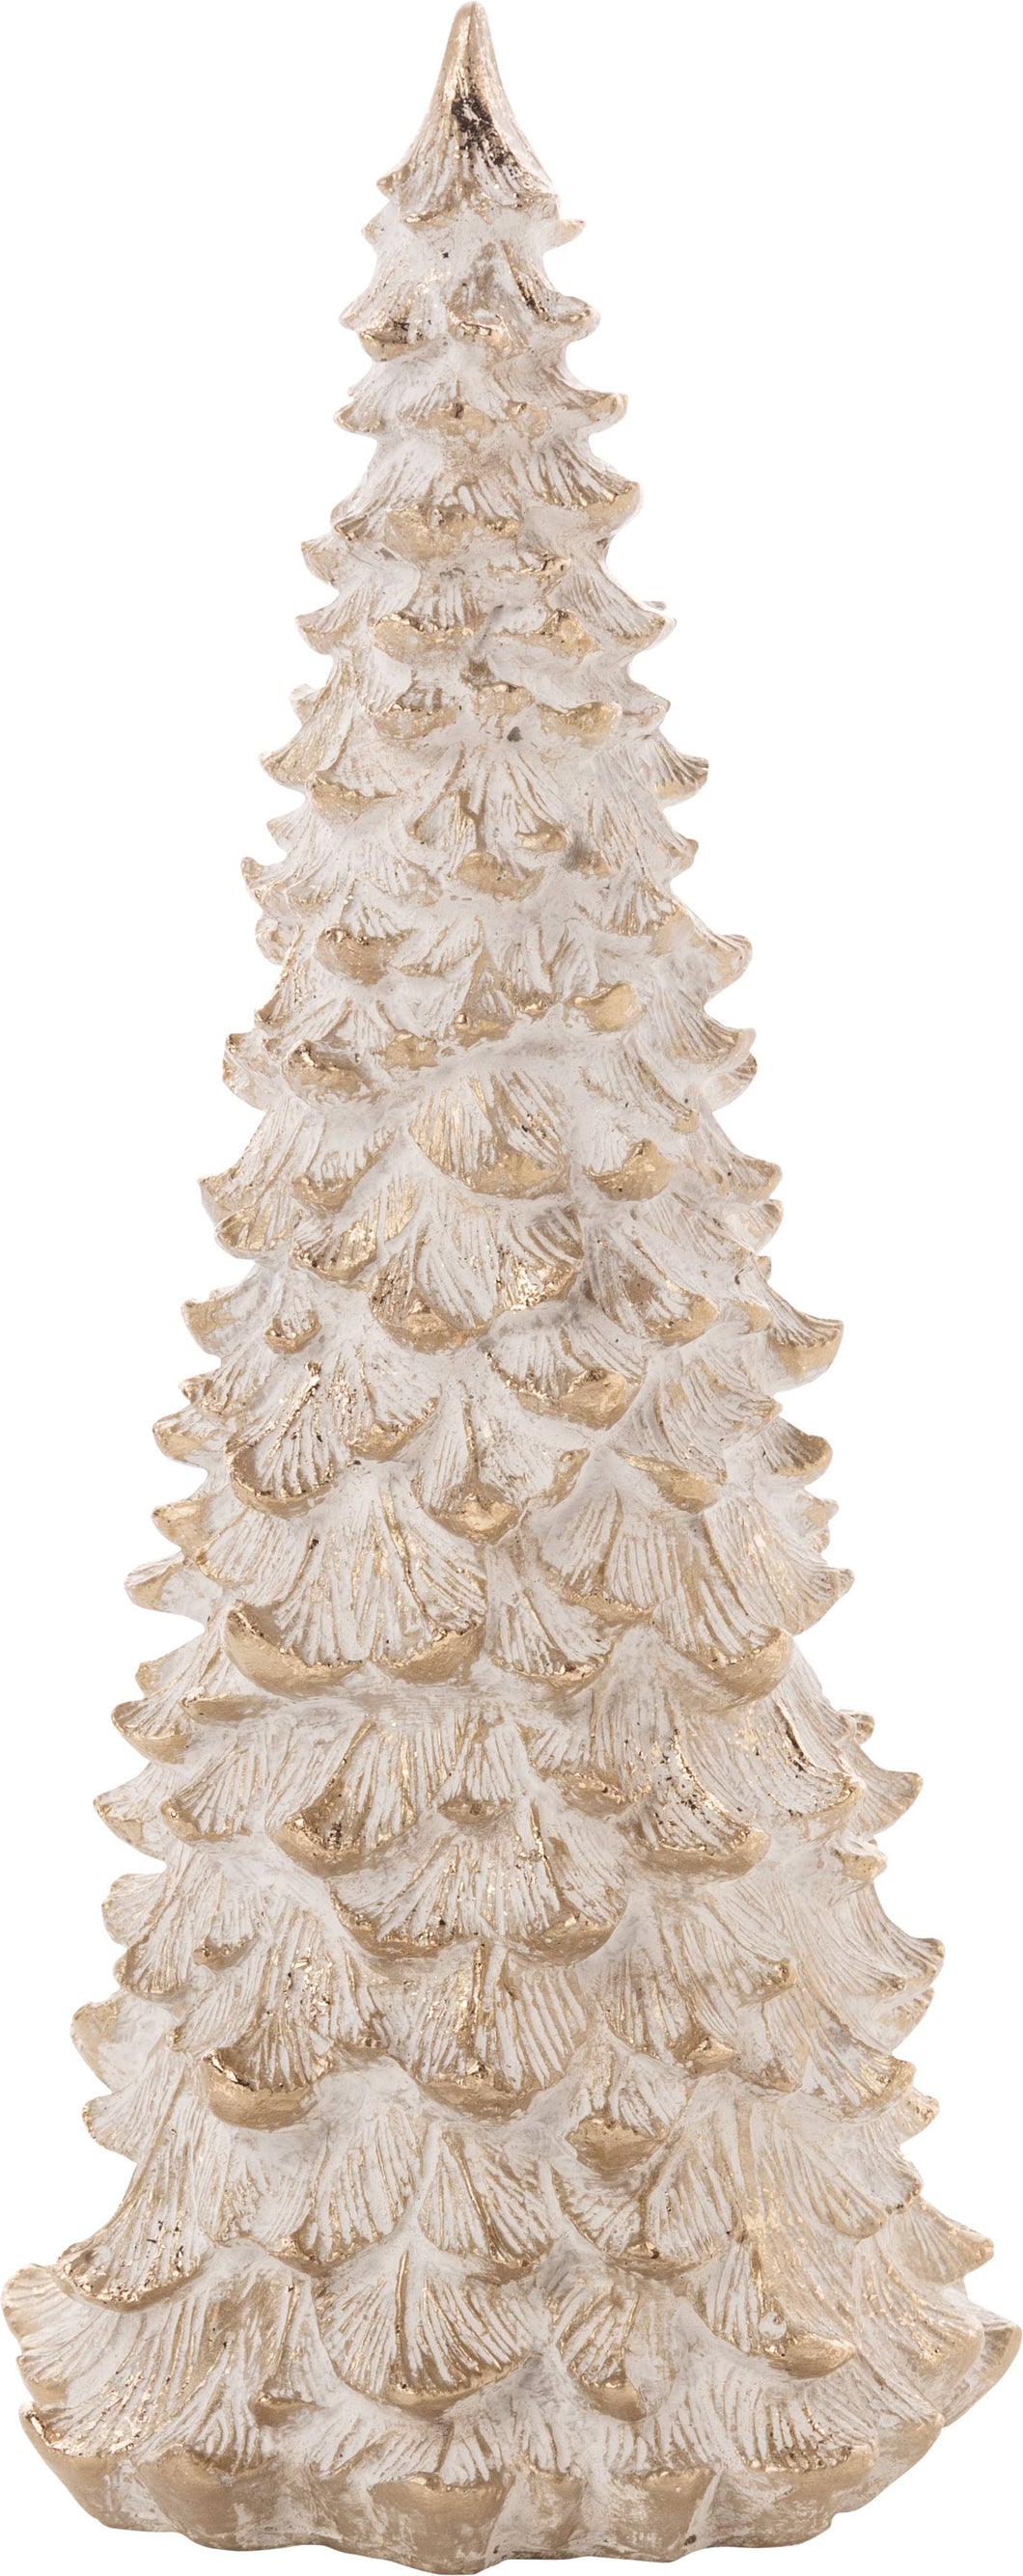 Silver Tree Home & Holiday - A23583 Fir Christmas tree,white,gold accents painted resin